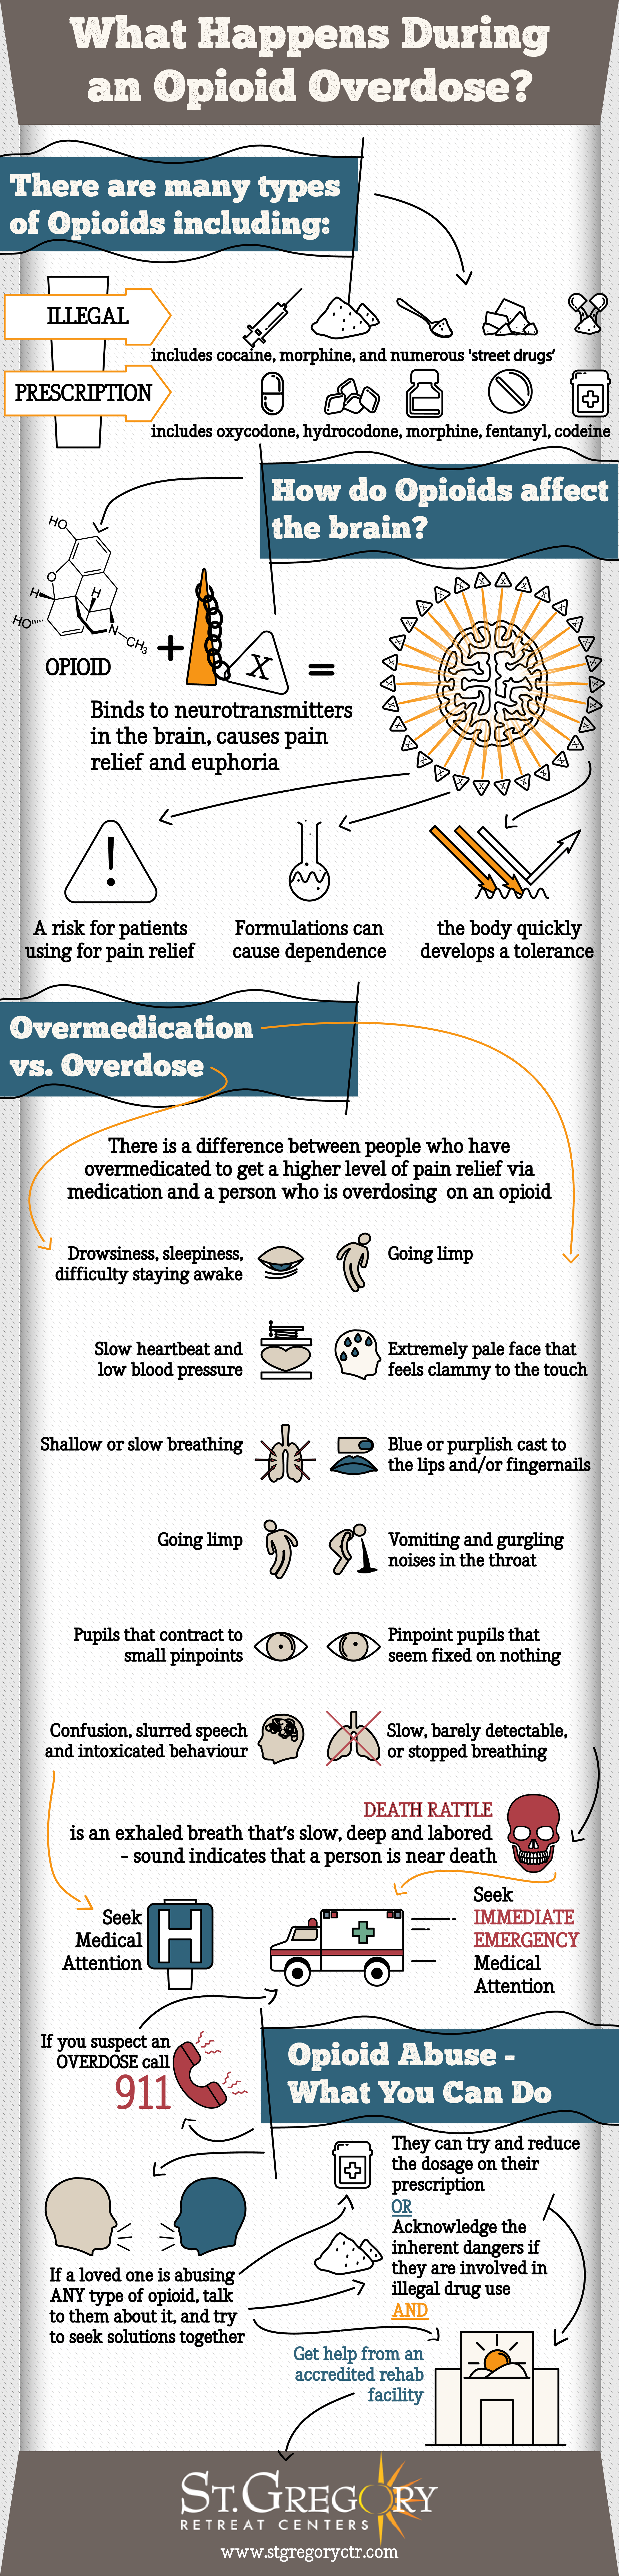 What Happens During an Opioid Overdose?